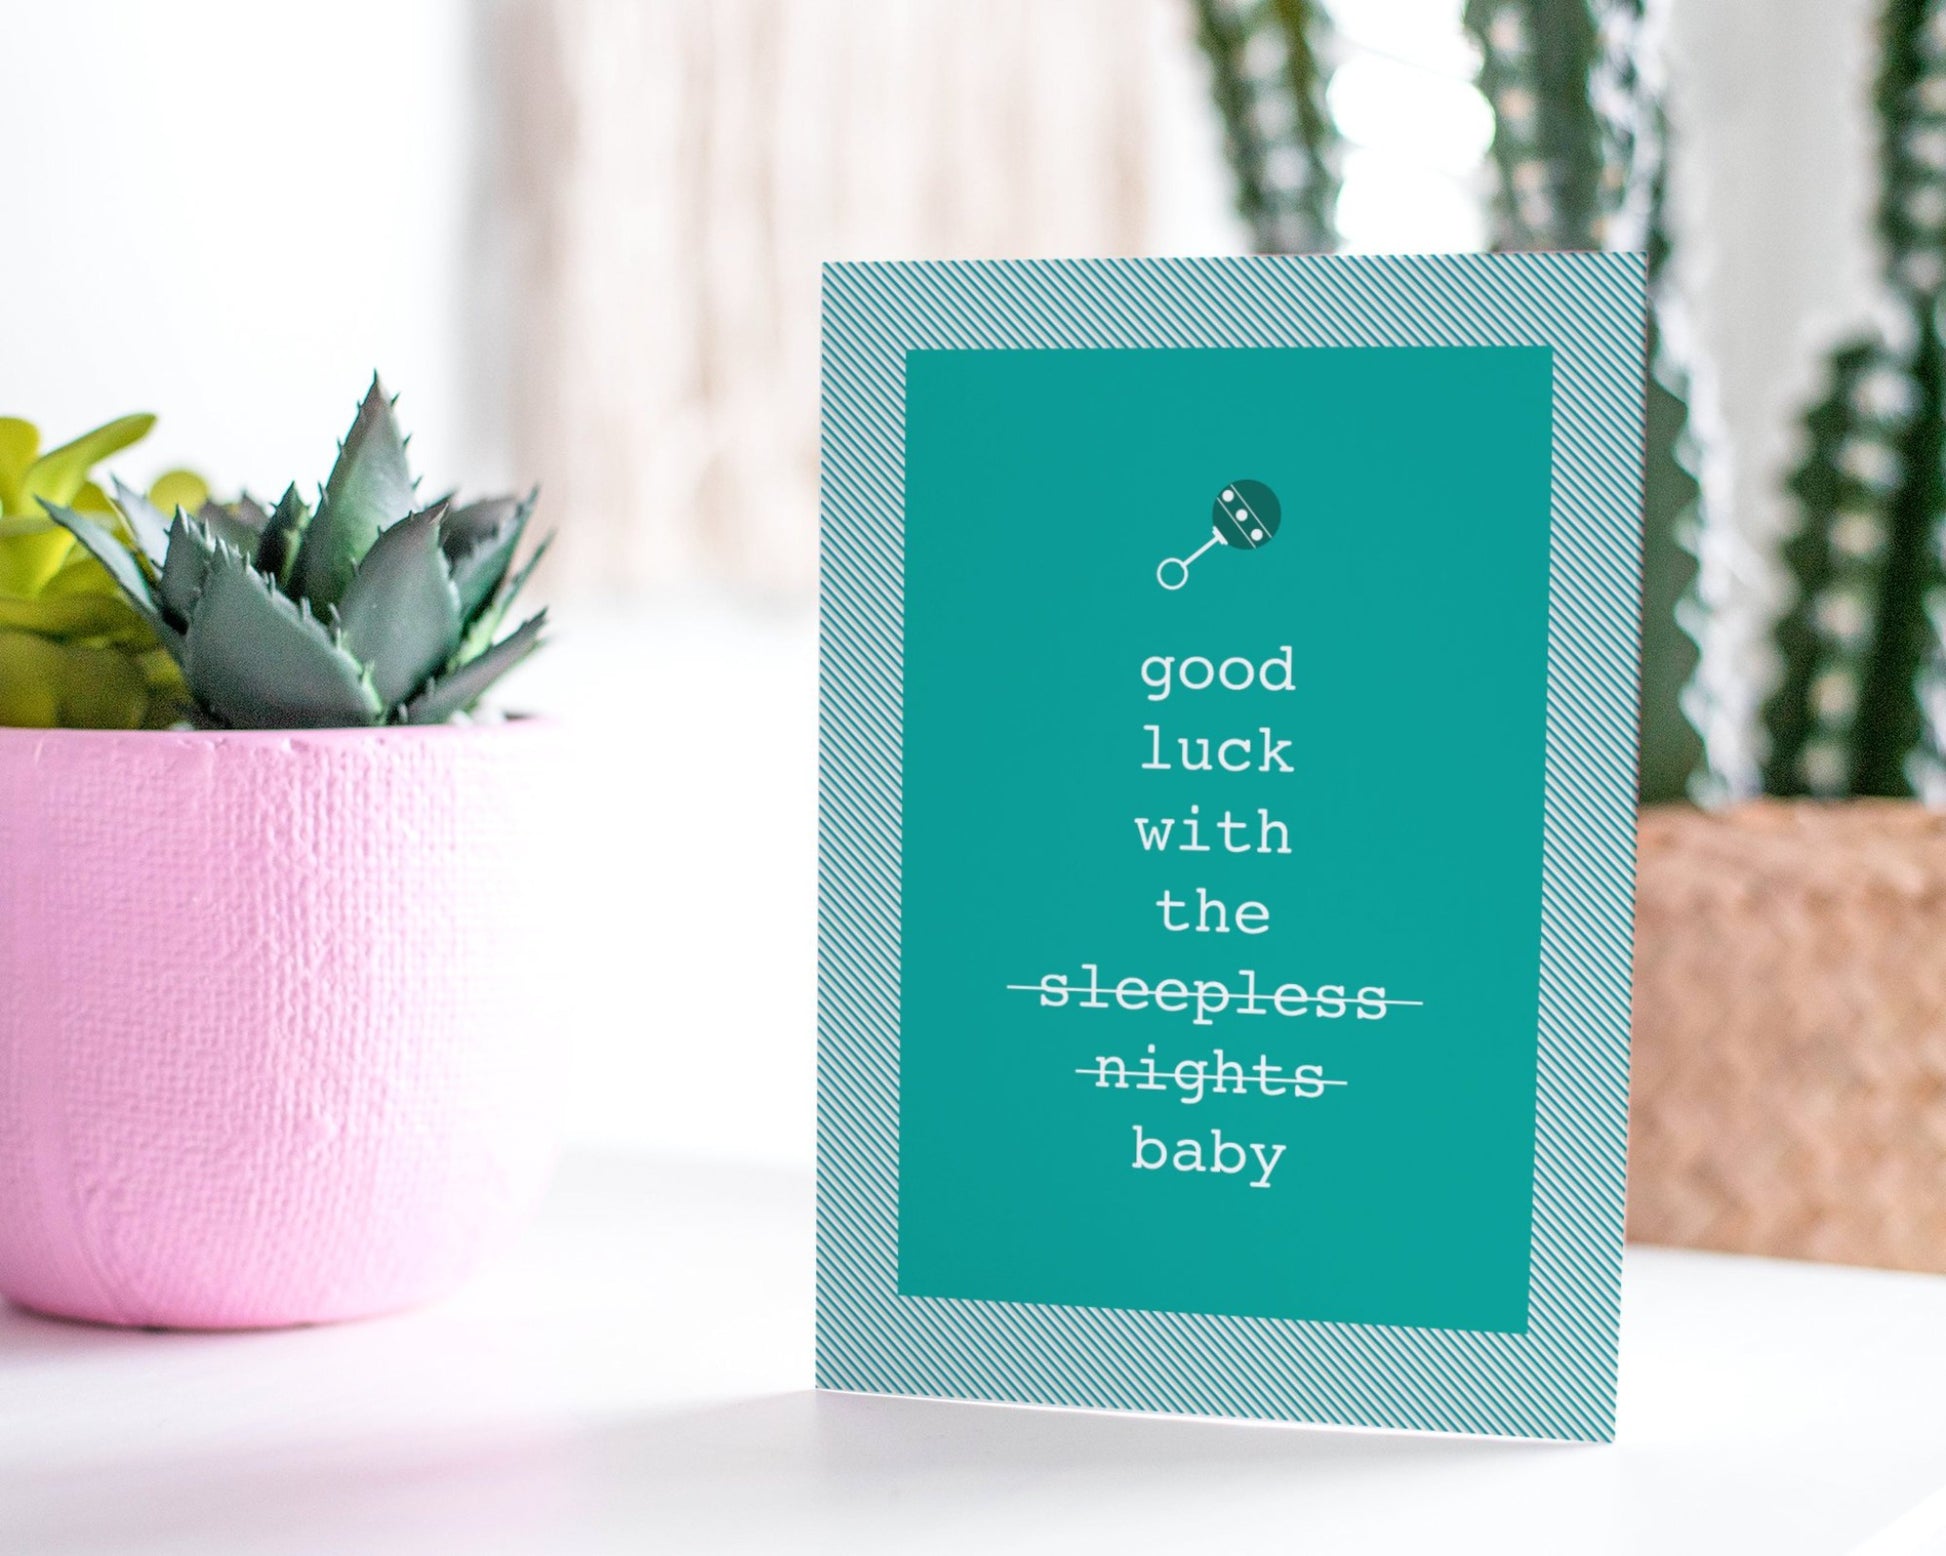 Good Luck with the baby! New Baby Congratulations Card.